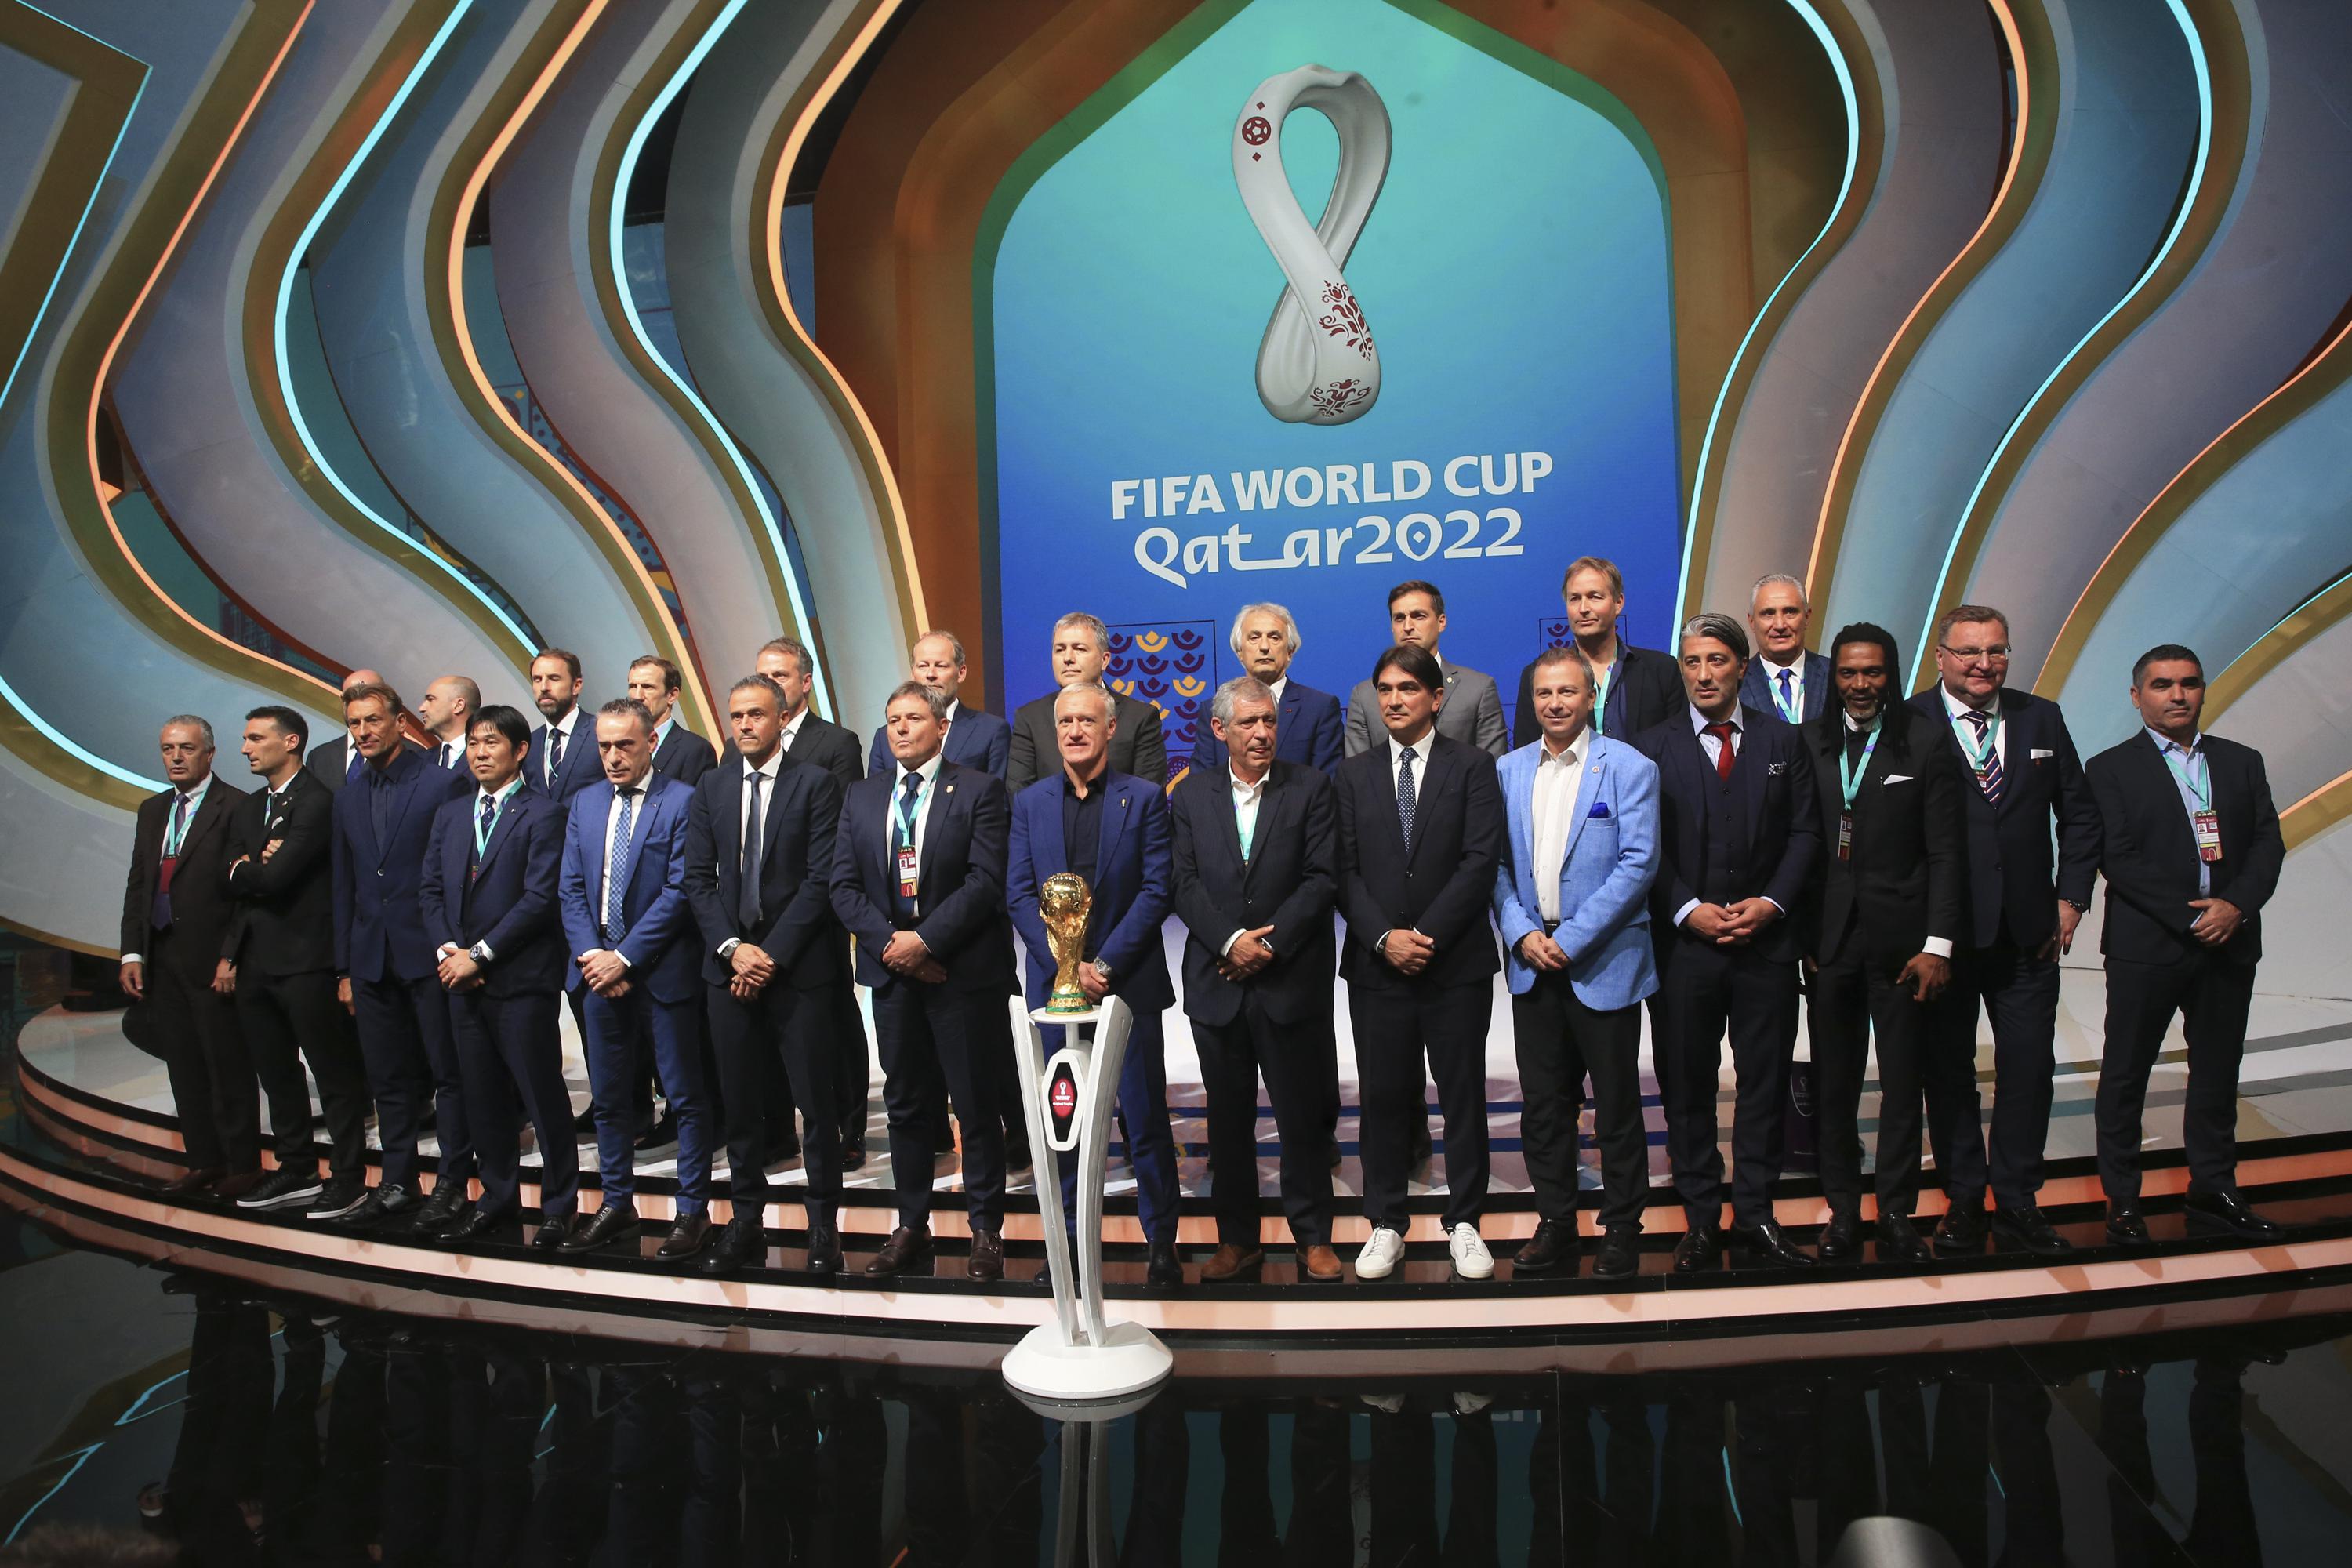 FIFA World Cup - Next stop: #FinalDraw Discover the groups on 1 April  #FIFAWorldCup